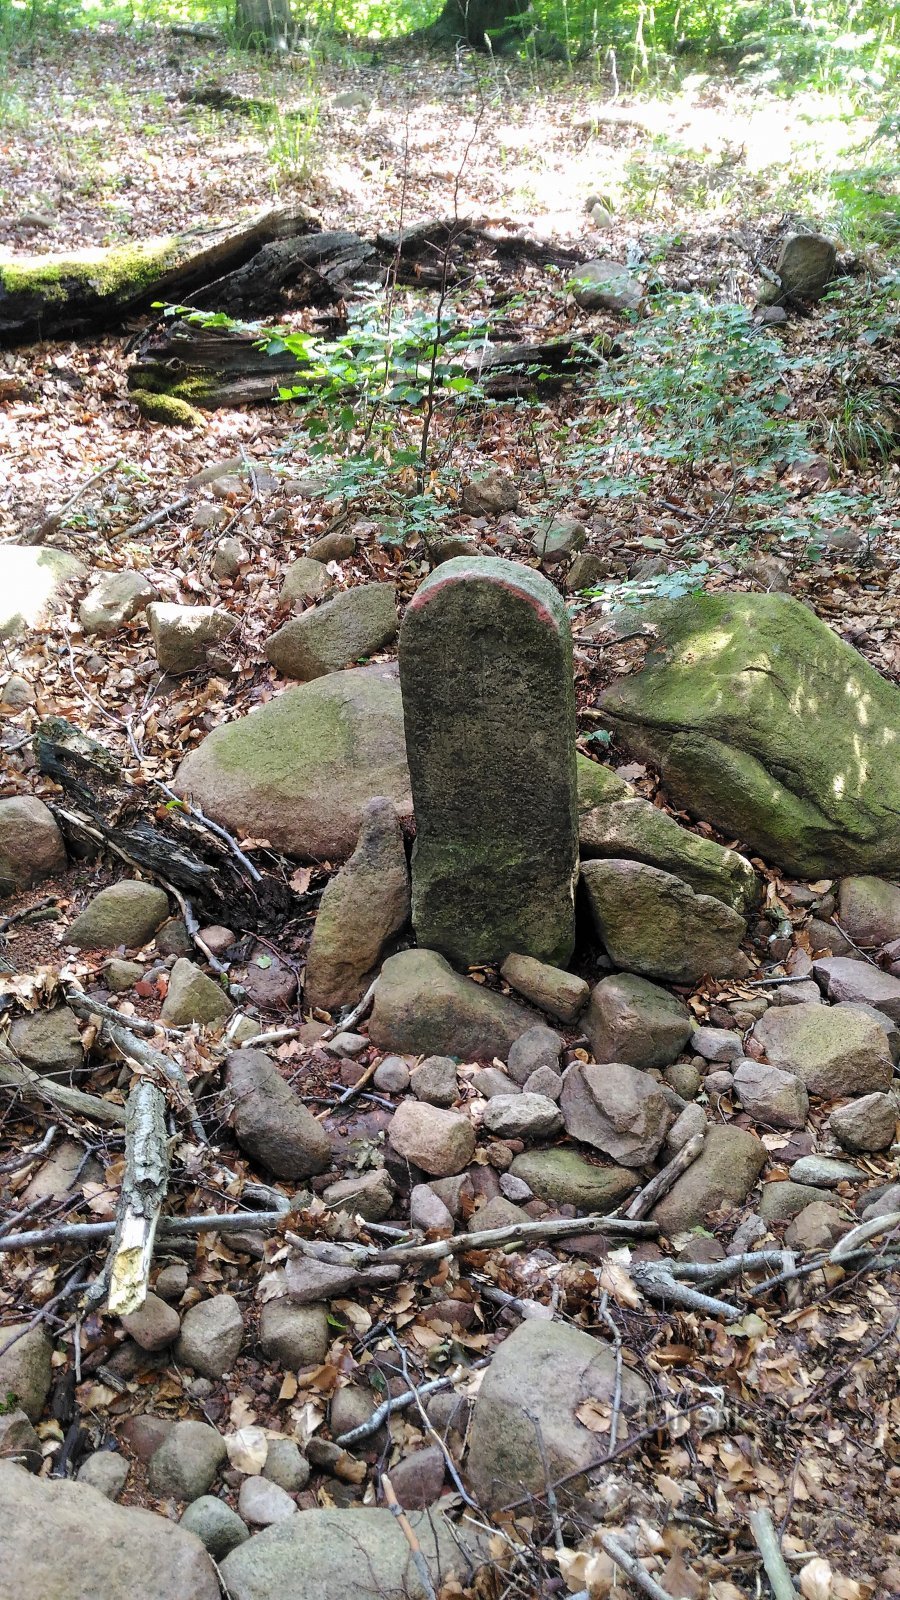 Boundary stones at Lesní potok in the Ore Mountains.